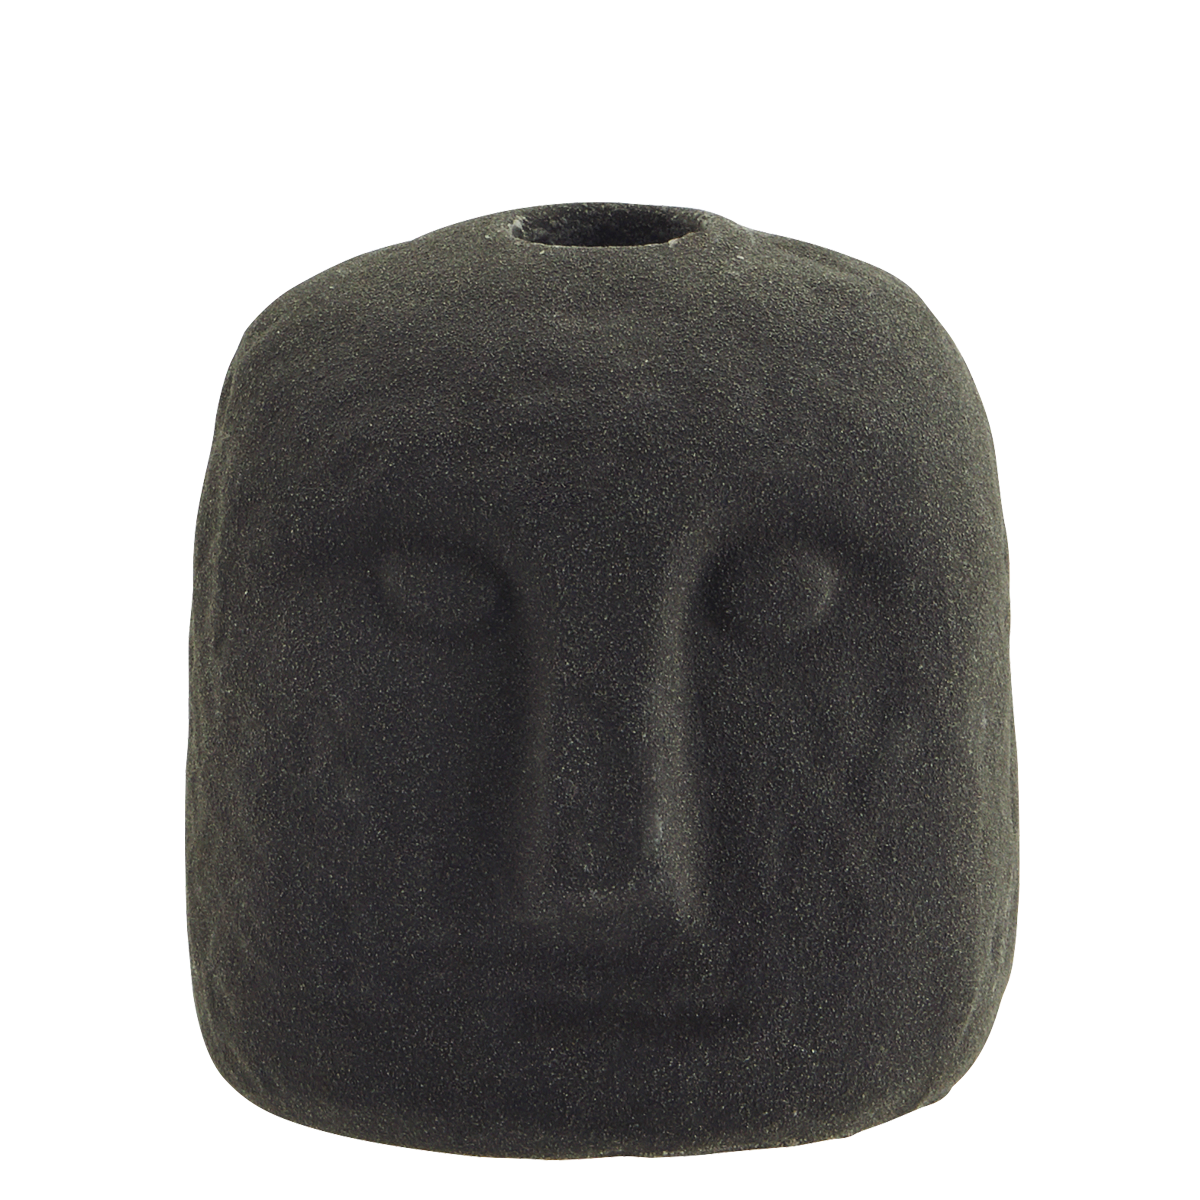 Candle holder w/ face imprint